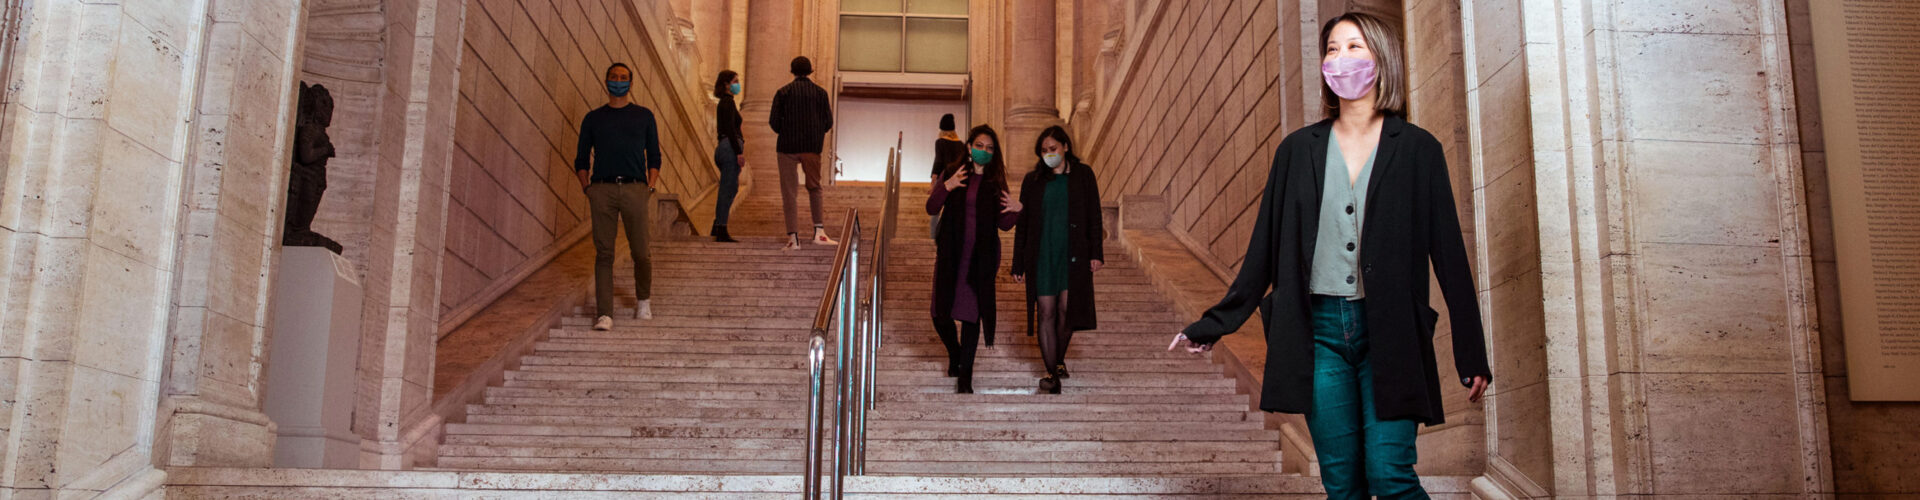 A woman wearing a mask descends a grand staircase.